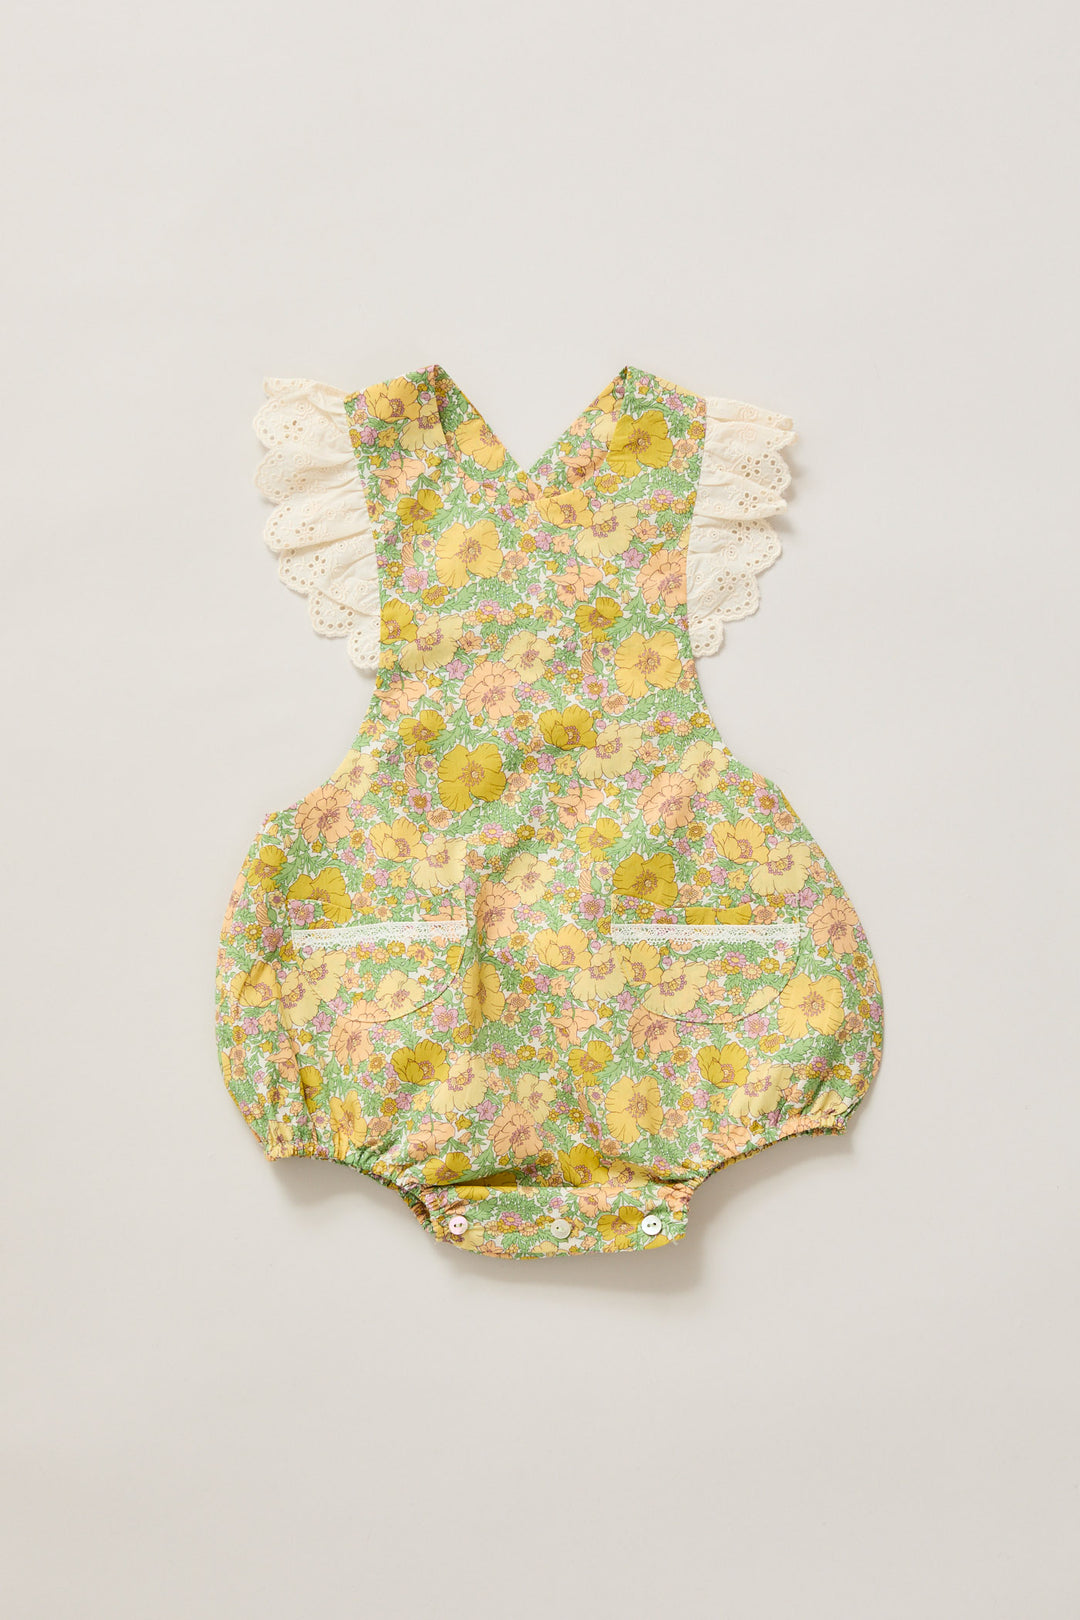 Lace Pinafore in California Poppy